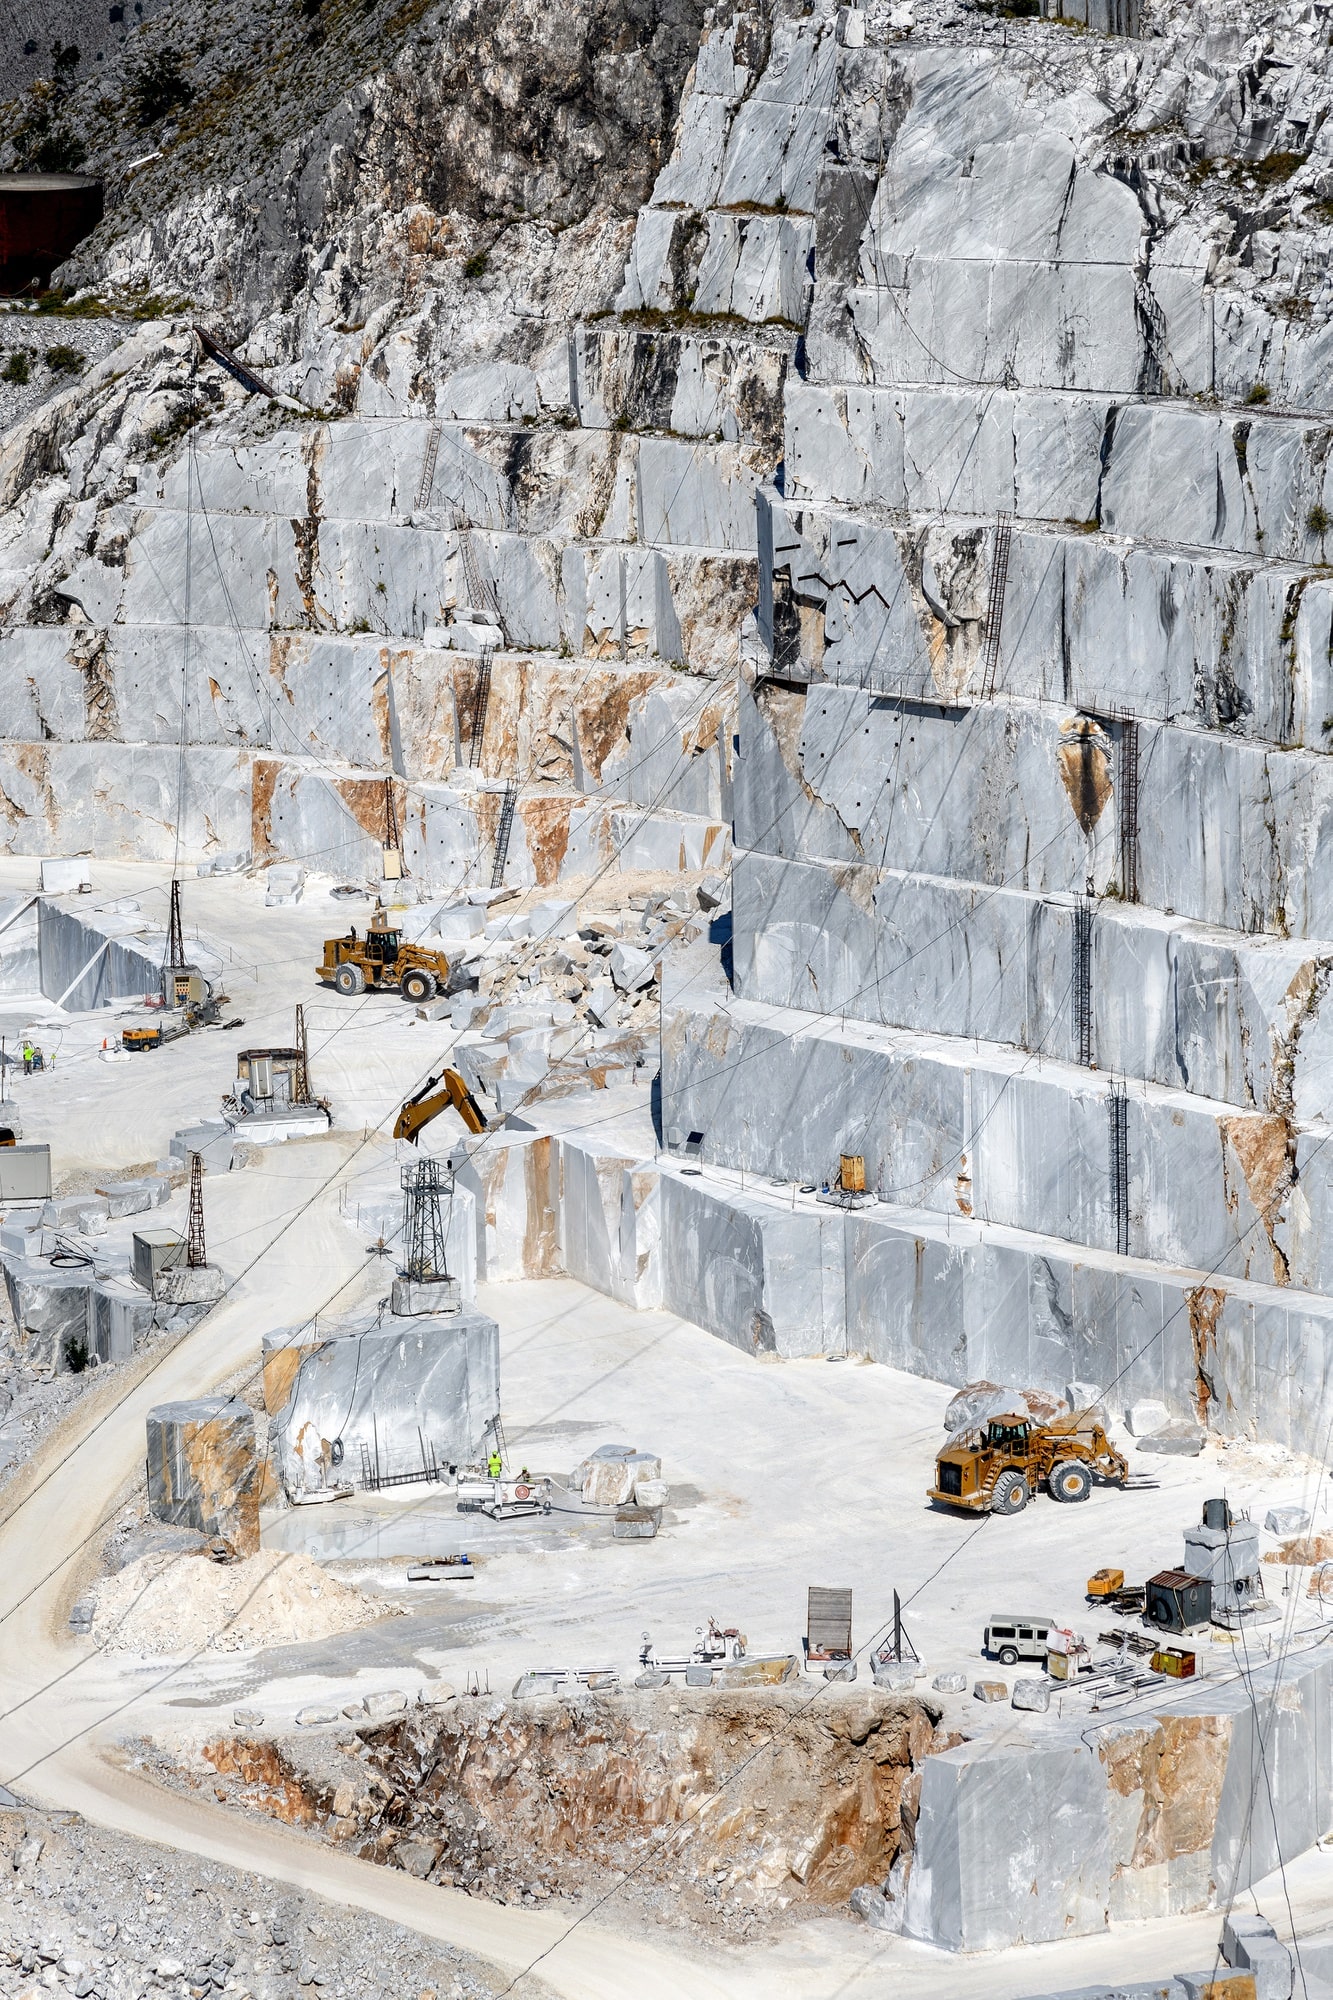 - The best quarries of Armani grey marble in the world